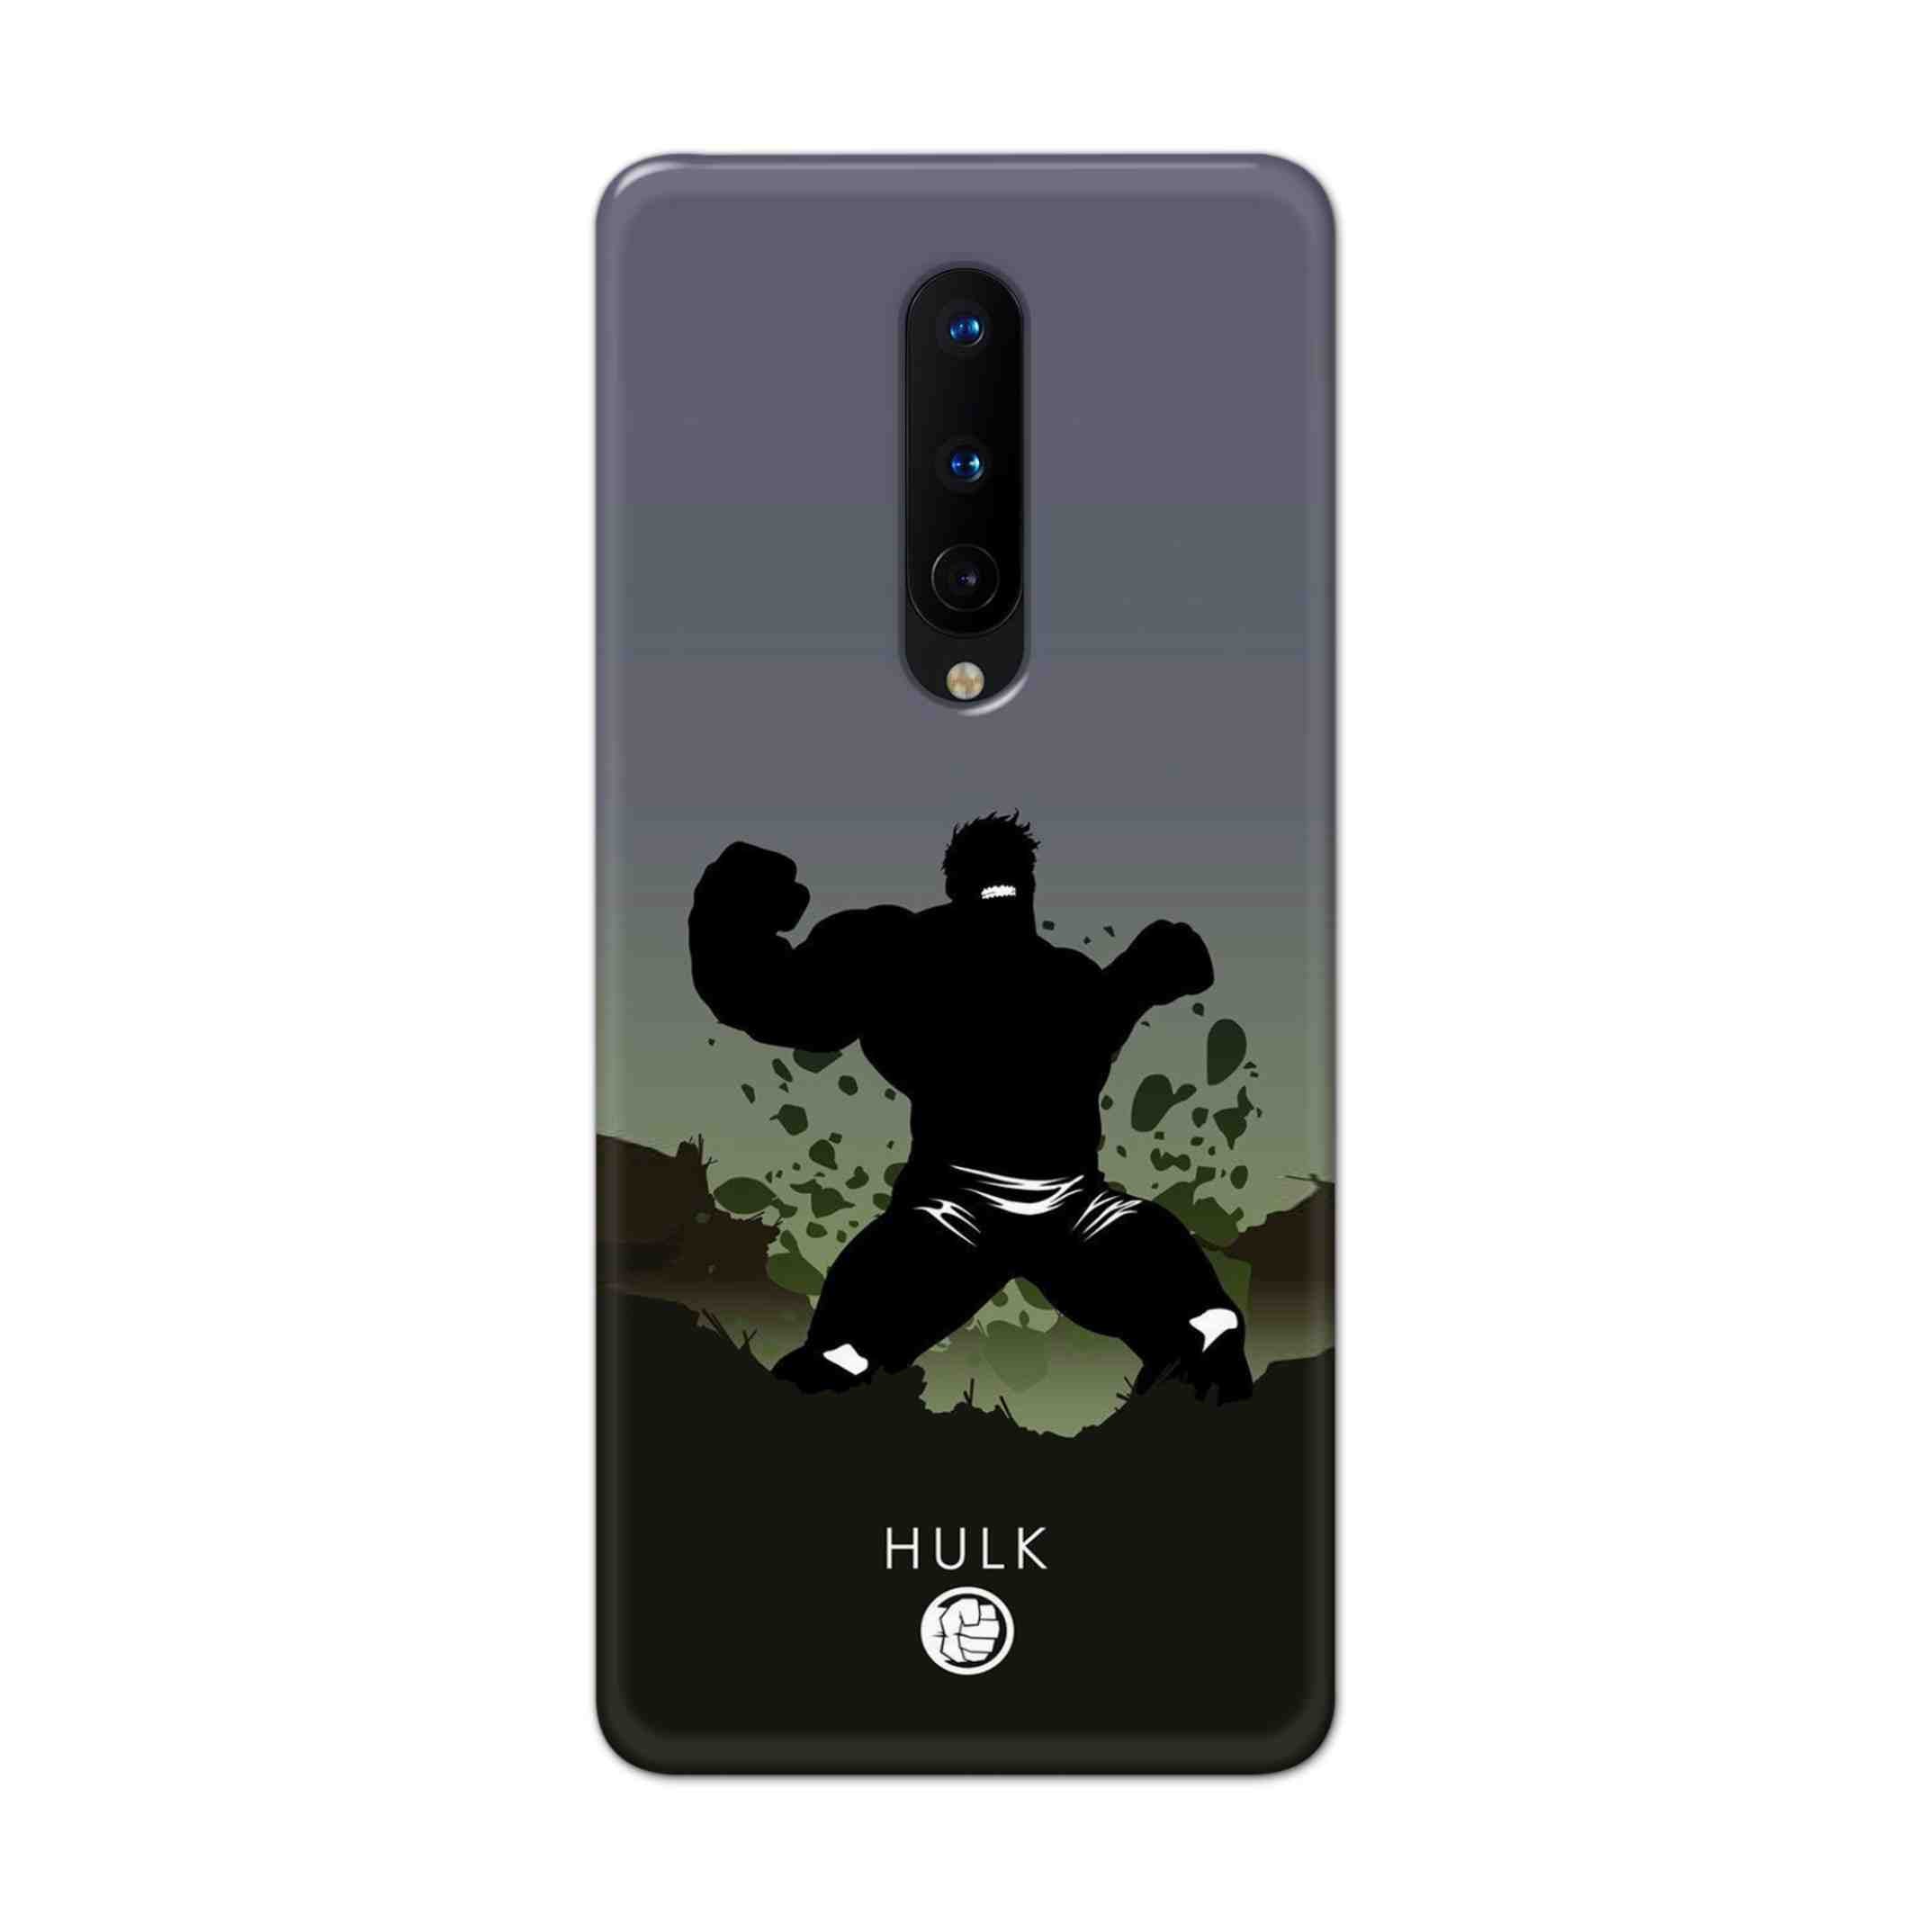 Buy Hulk Drax Hard Back Mobile Phone Case Cover For OnePlus 8 Online